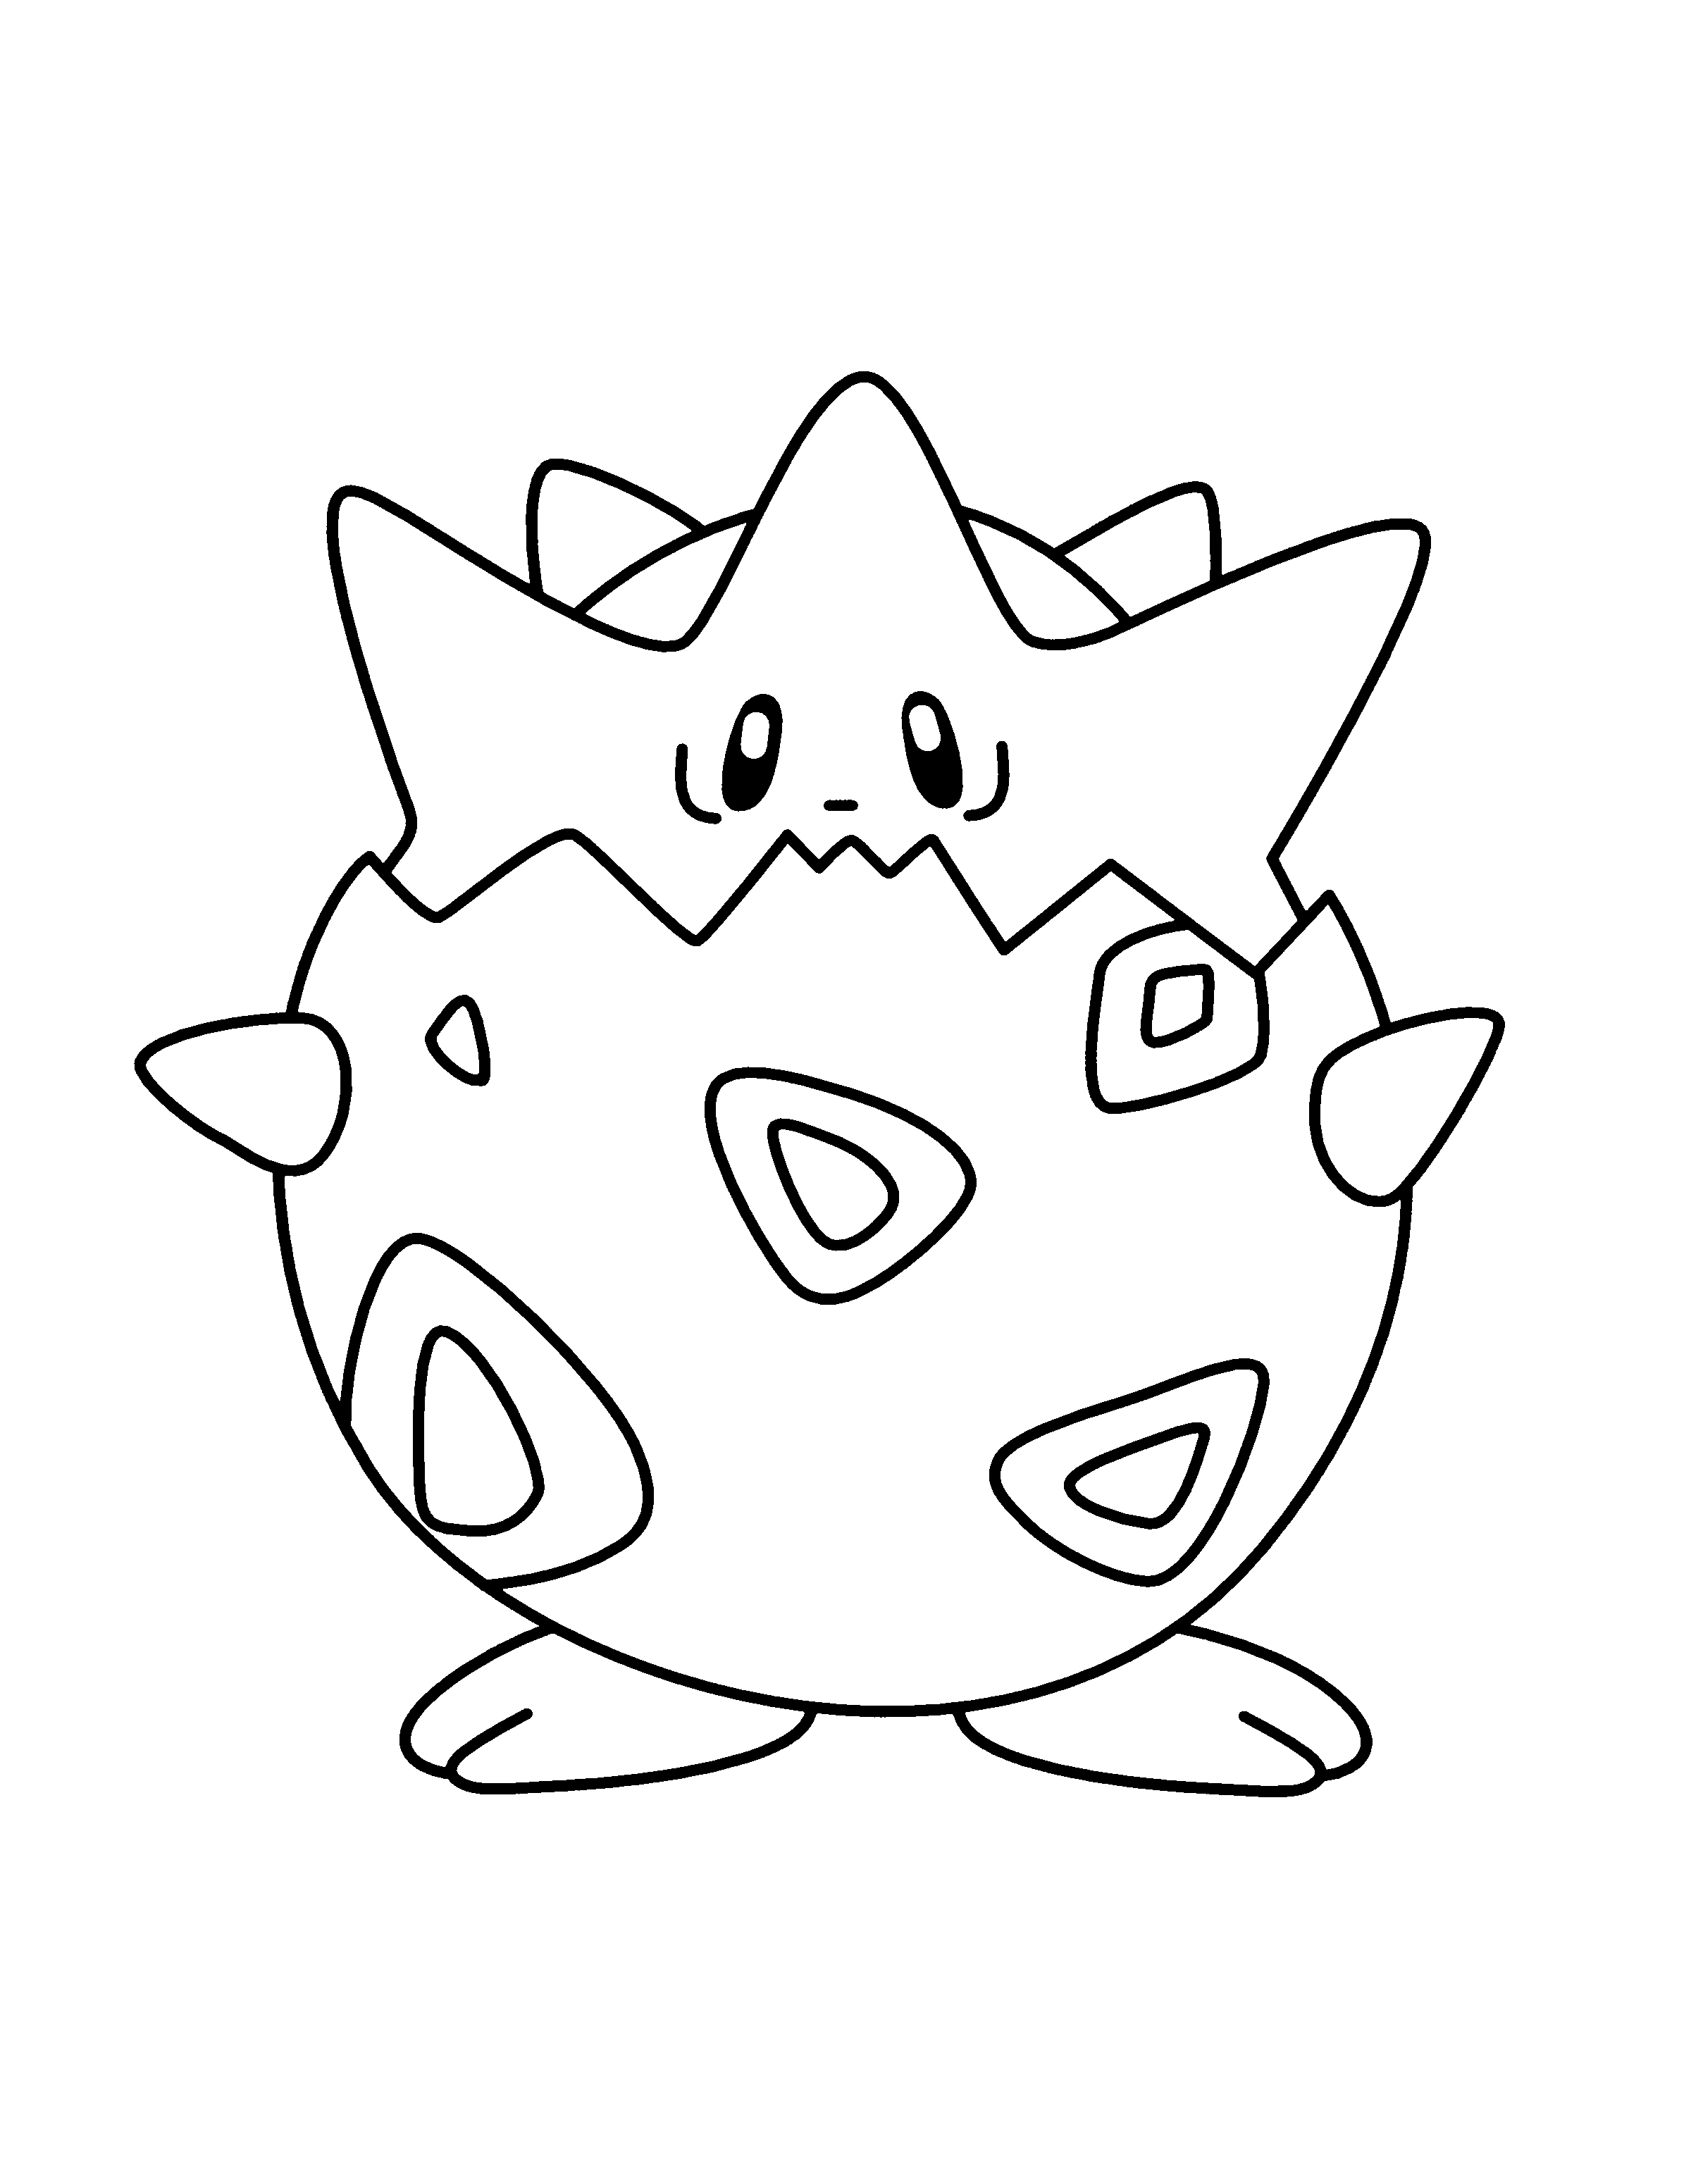 animated-coloring-pages-pokemon-image-0170